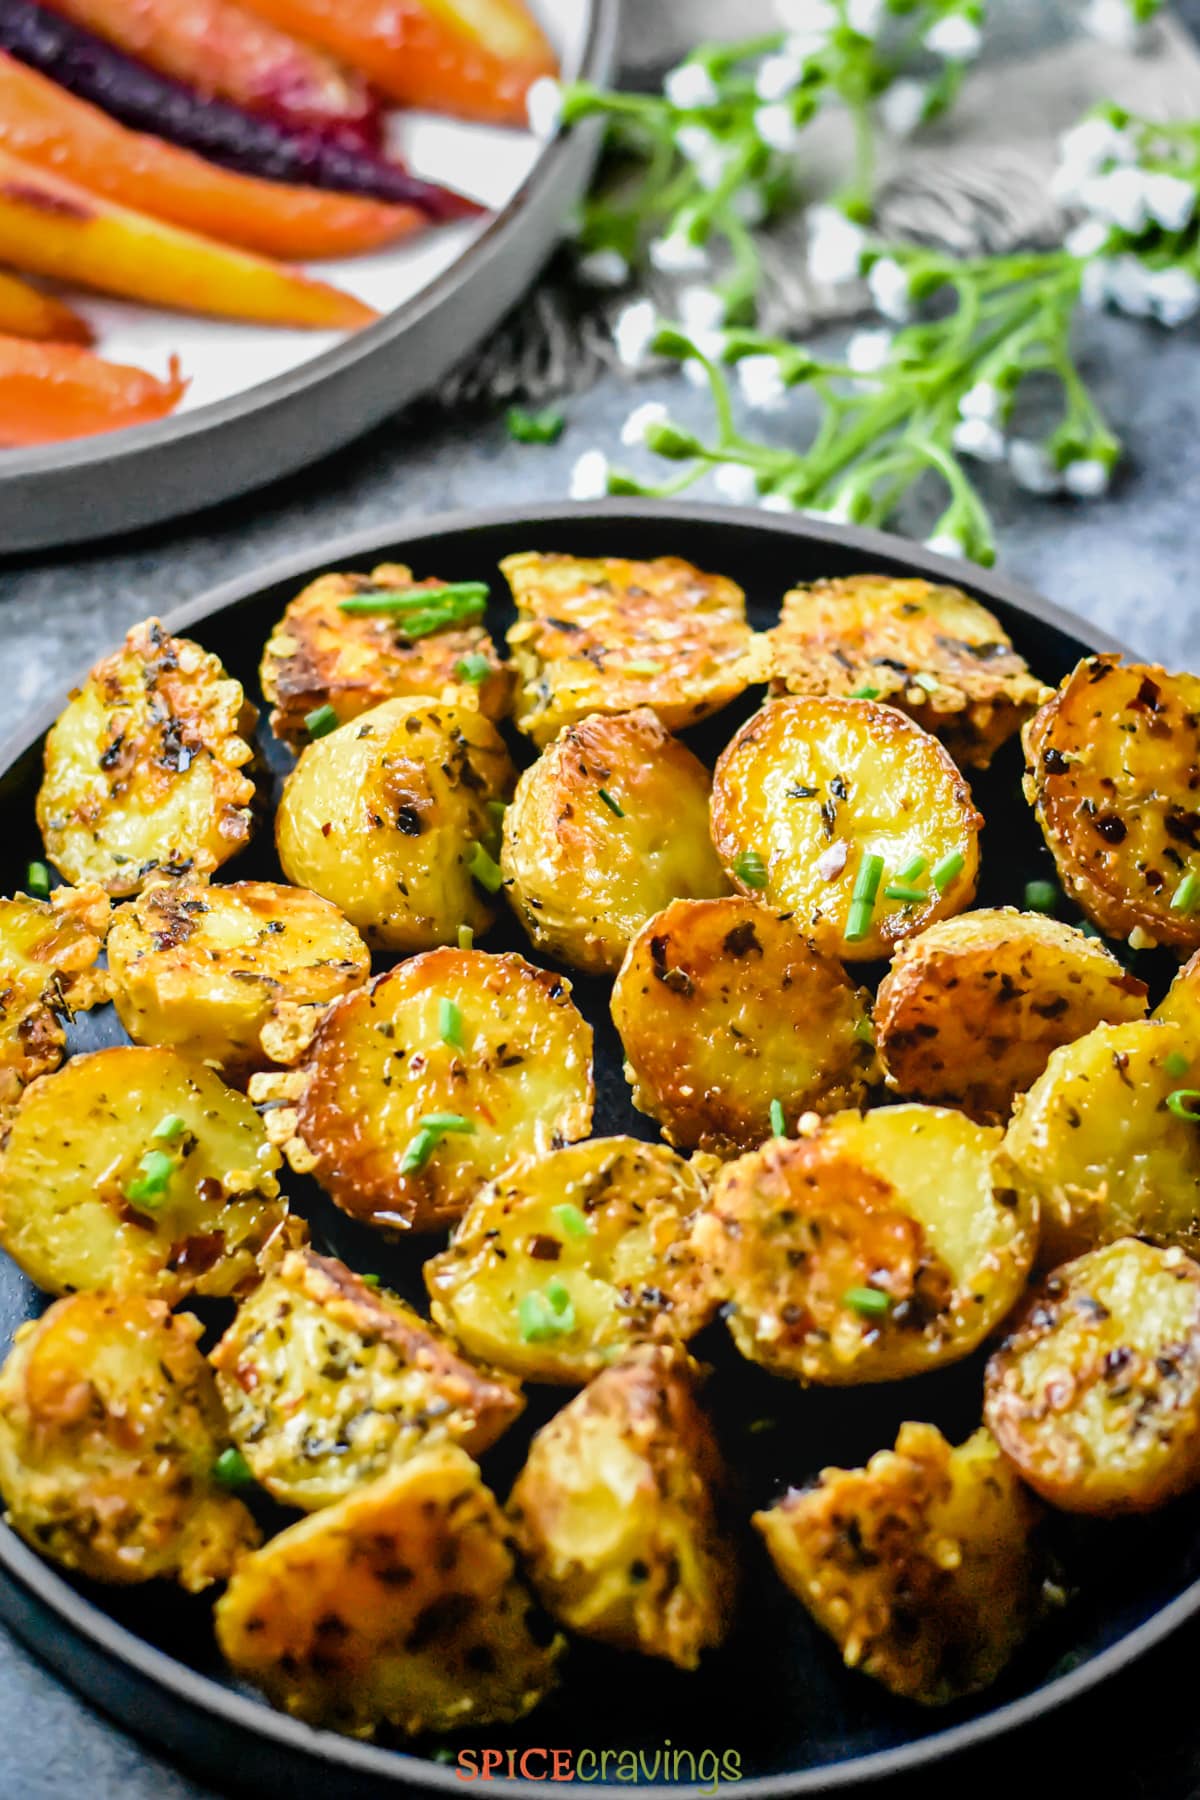 Parmesan roasted potatoes served with glazed carrots